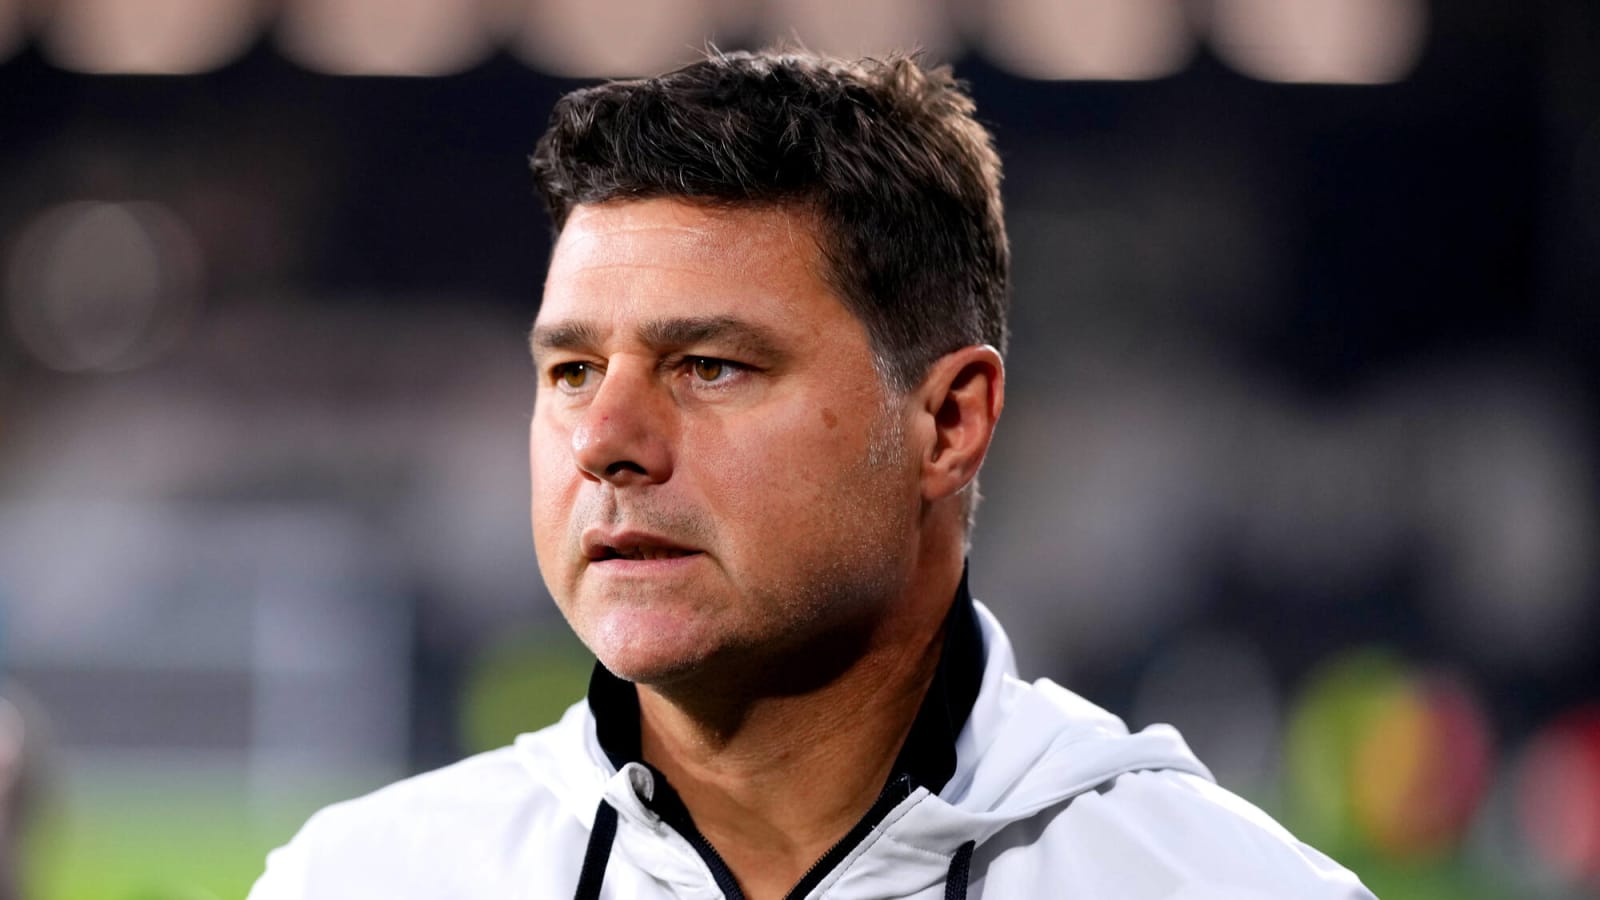 Chelsea star’s wife issues apology for her outburst aimed at Pochettino